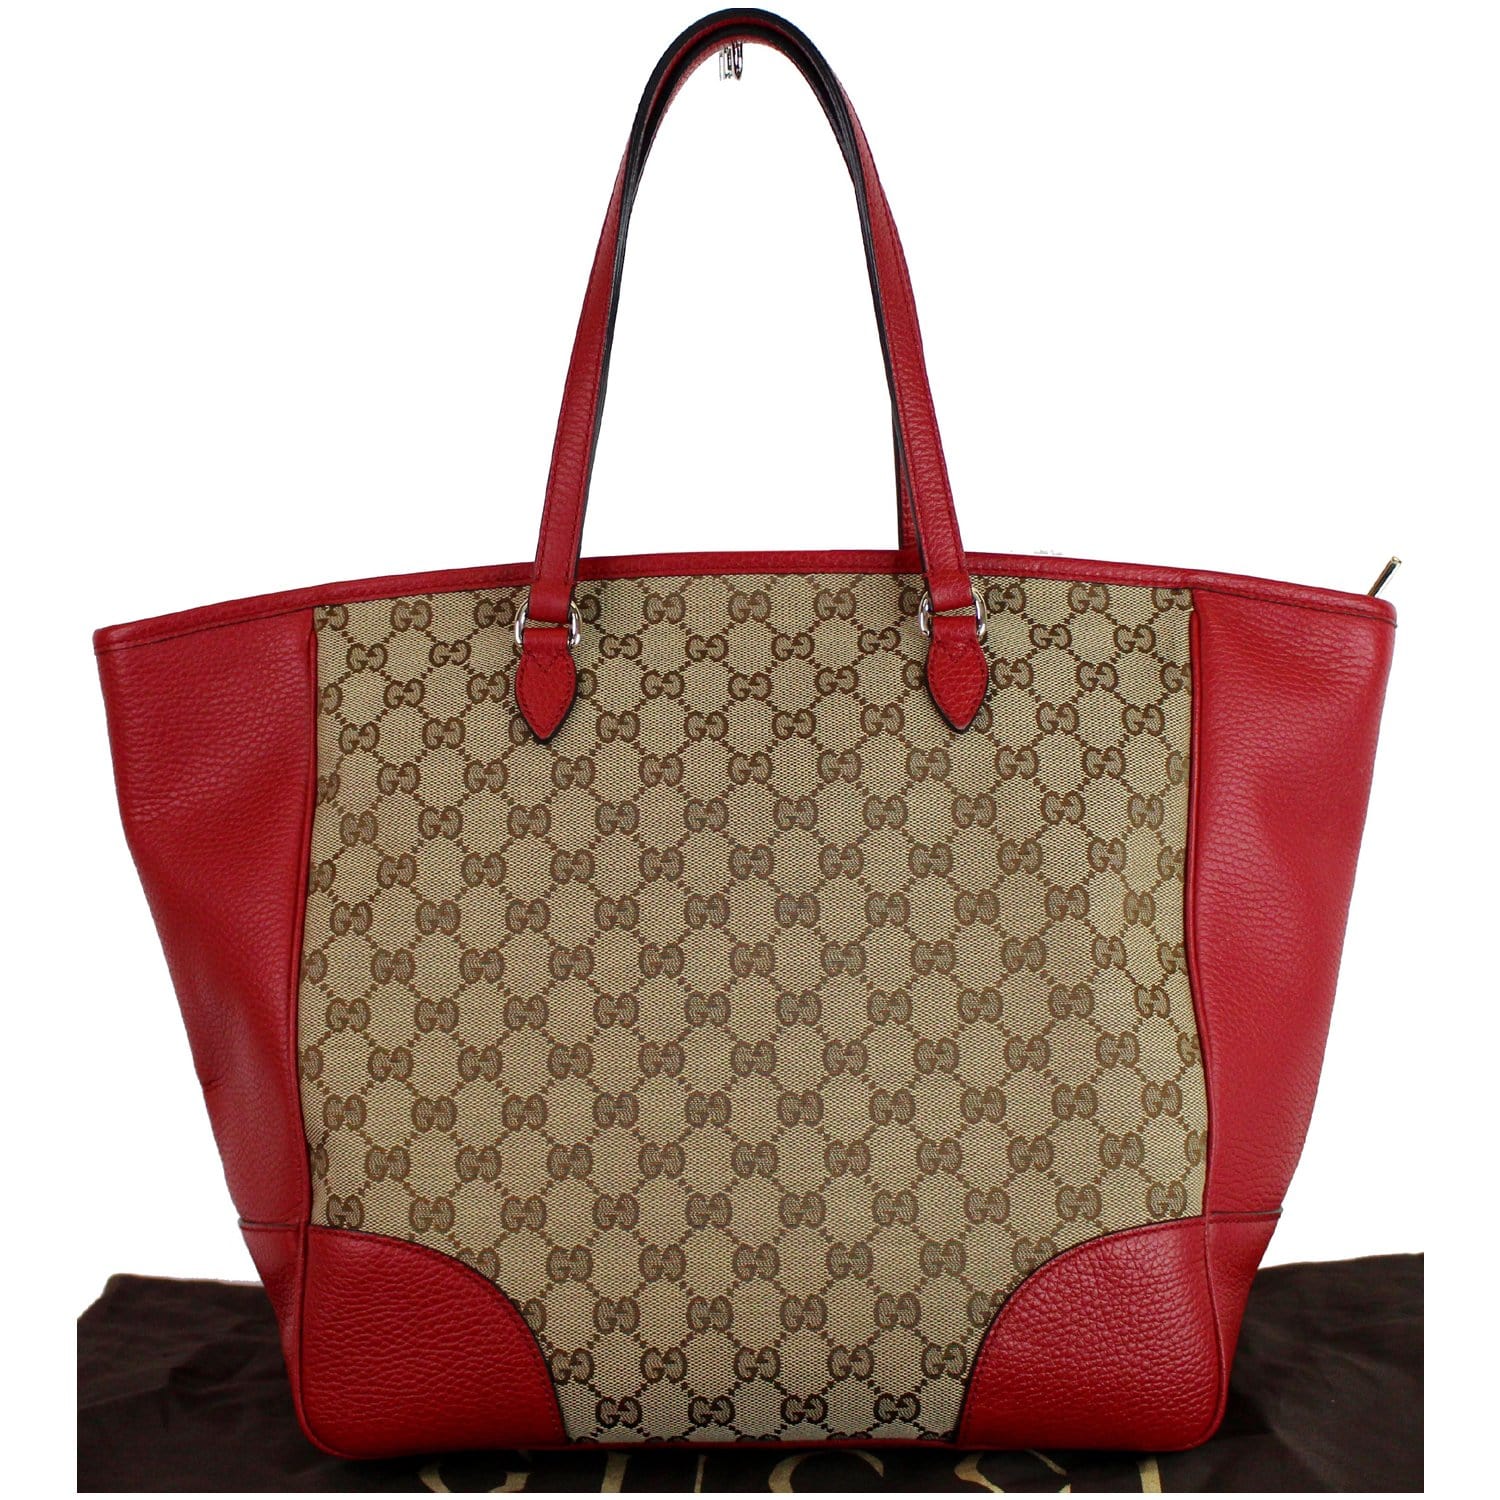 VINTAGE GUCCI 131228 GG Canvas Tote Bag / Web Zip Tote Bag Brown/Red Sz  Small